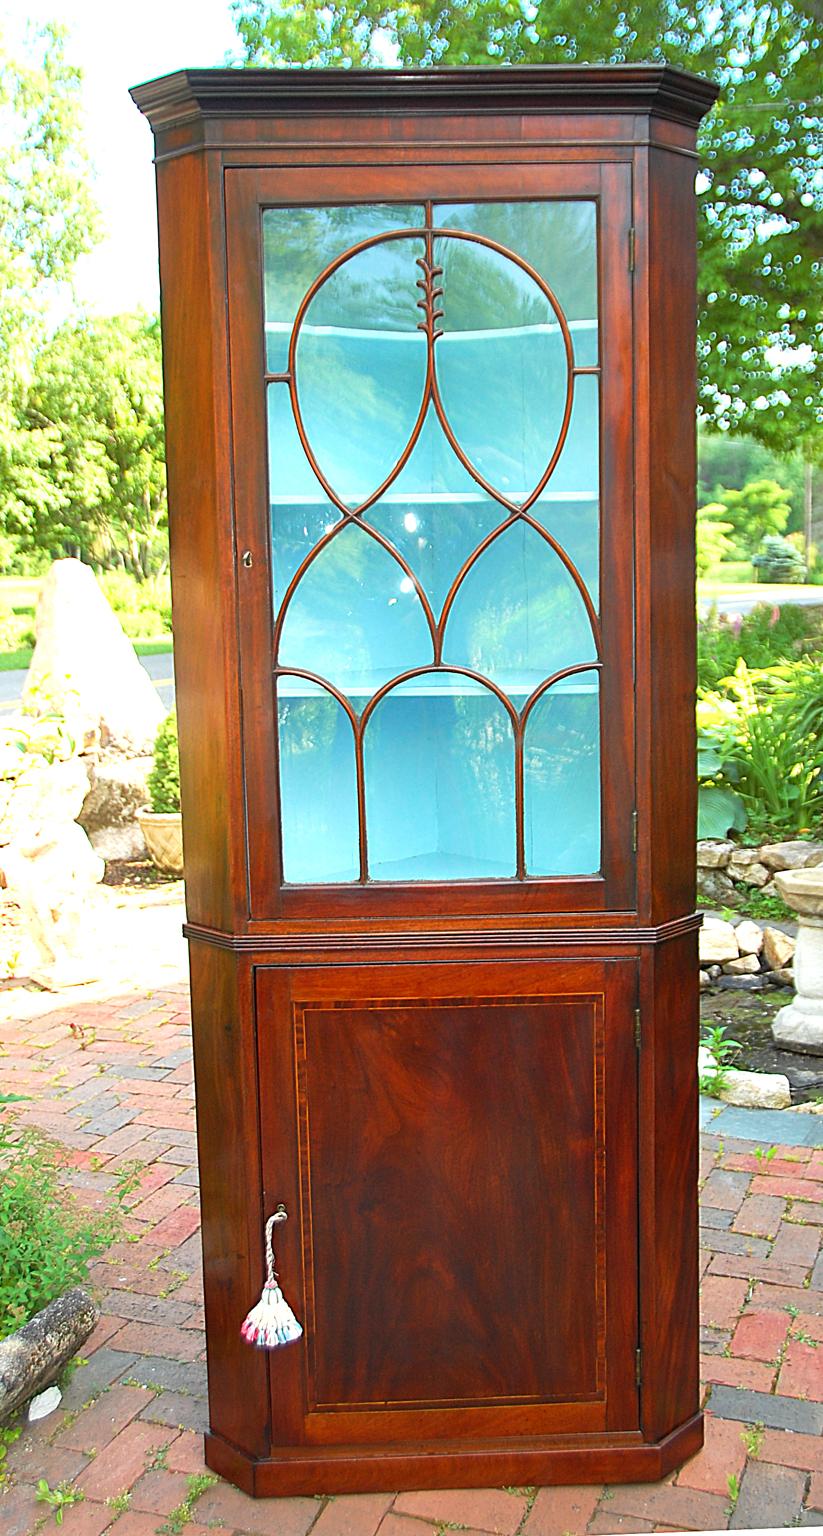 English Regency mahogany corner cupboard in two parts with the top having an astragal glazed and carved door in an unusual pattern, and an ogee cornice. The bottom has a paneled door with mahogany crossbanding enclosed by boxwood stringing, on a